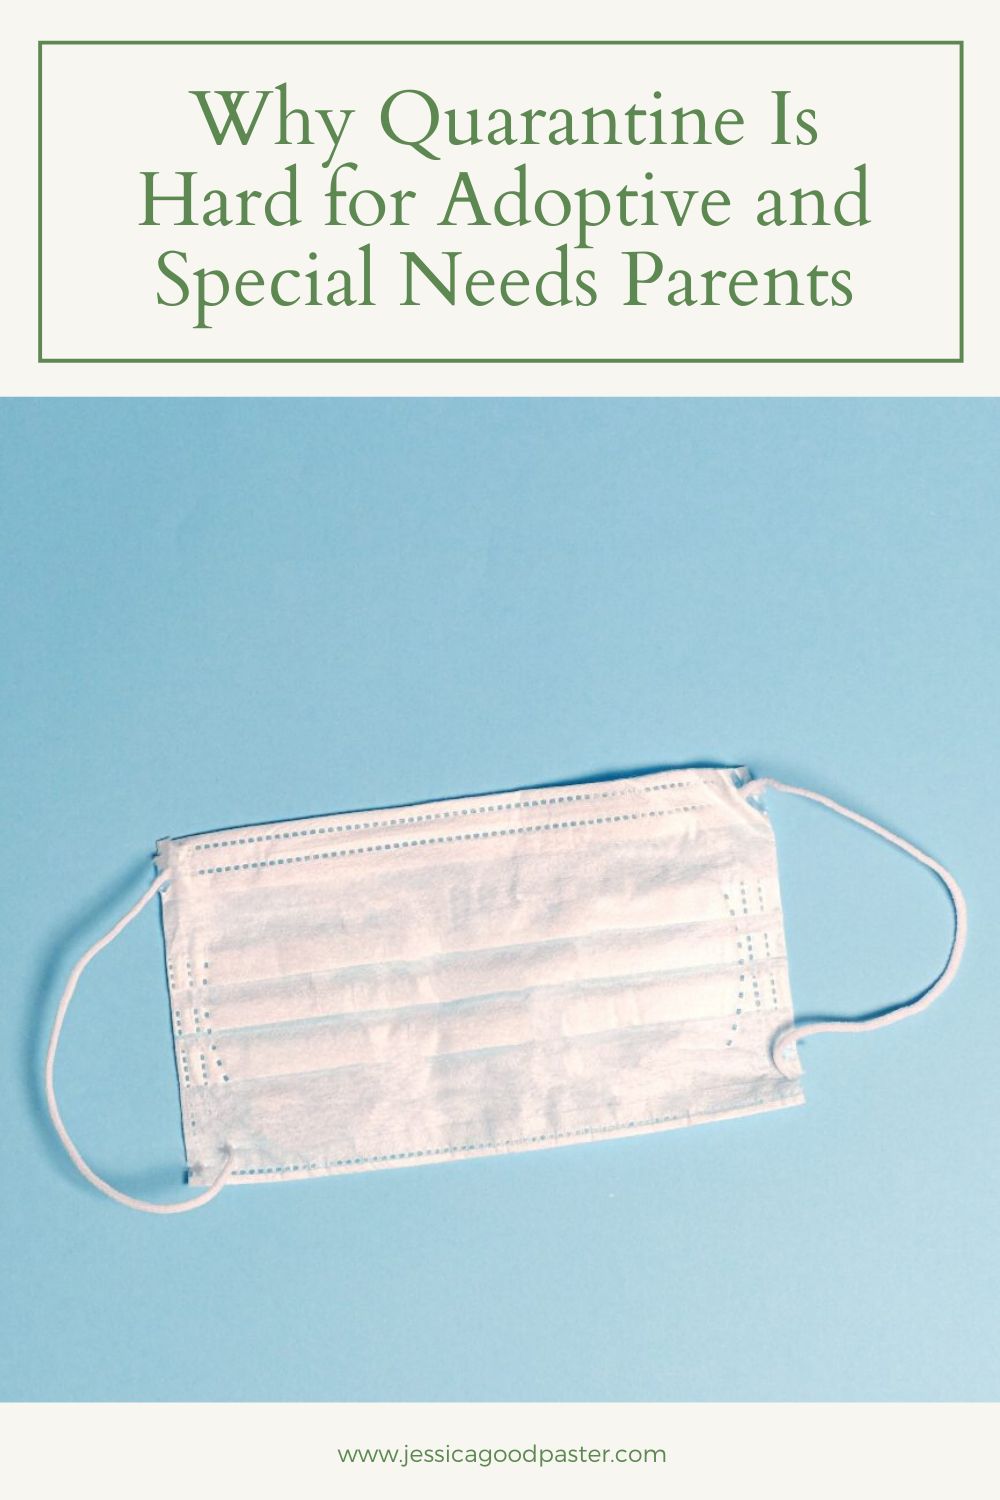 Social distancing is tough on all parents, but keeping kids from hard places, adoption, and special needs at home has extra challenges. Moms struggling with teletherapy, NTI preschool, IEPs, and trauma for their kids will feel seen by this story. #specialneeds #parenting #adoption #quarantinelife